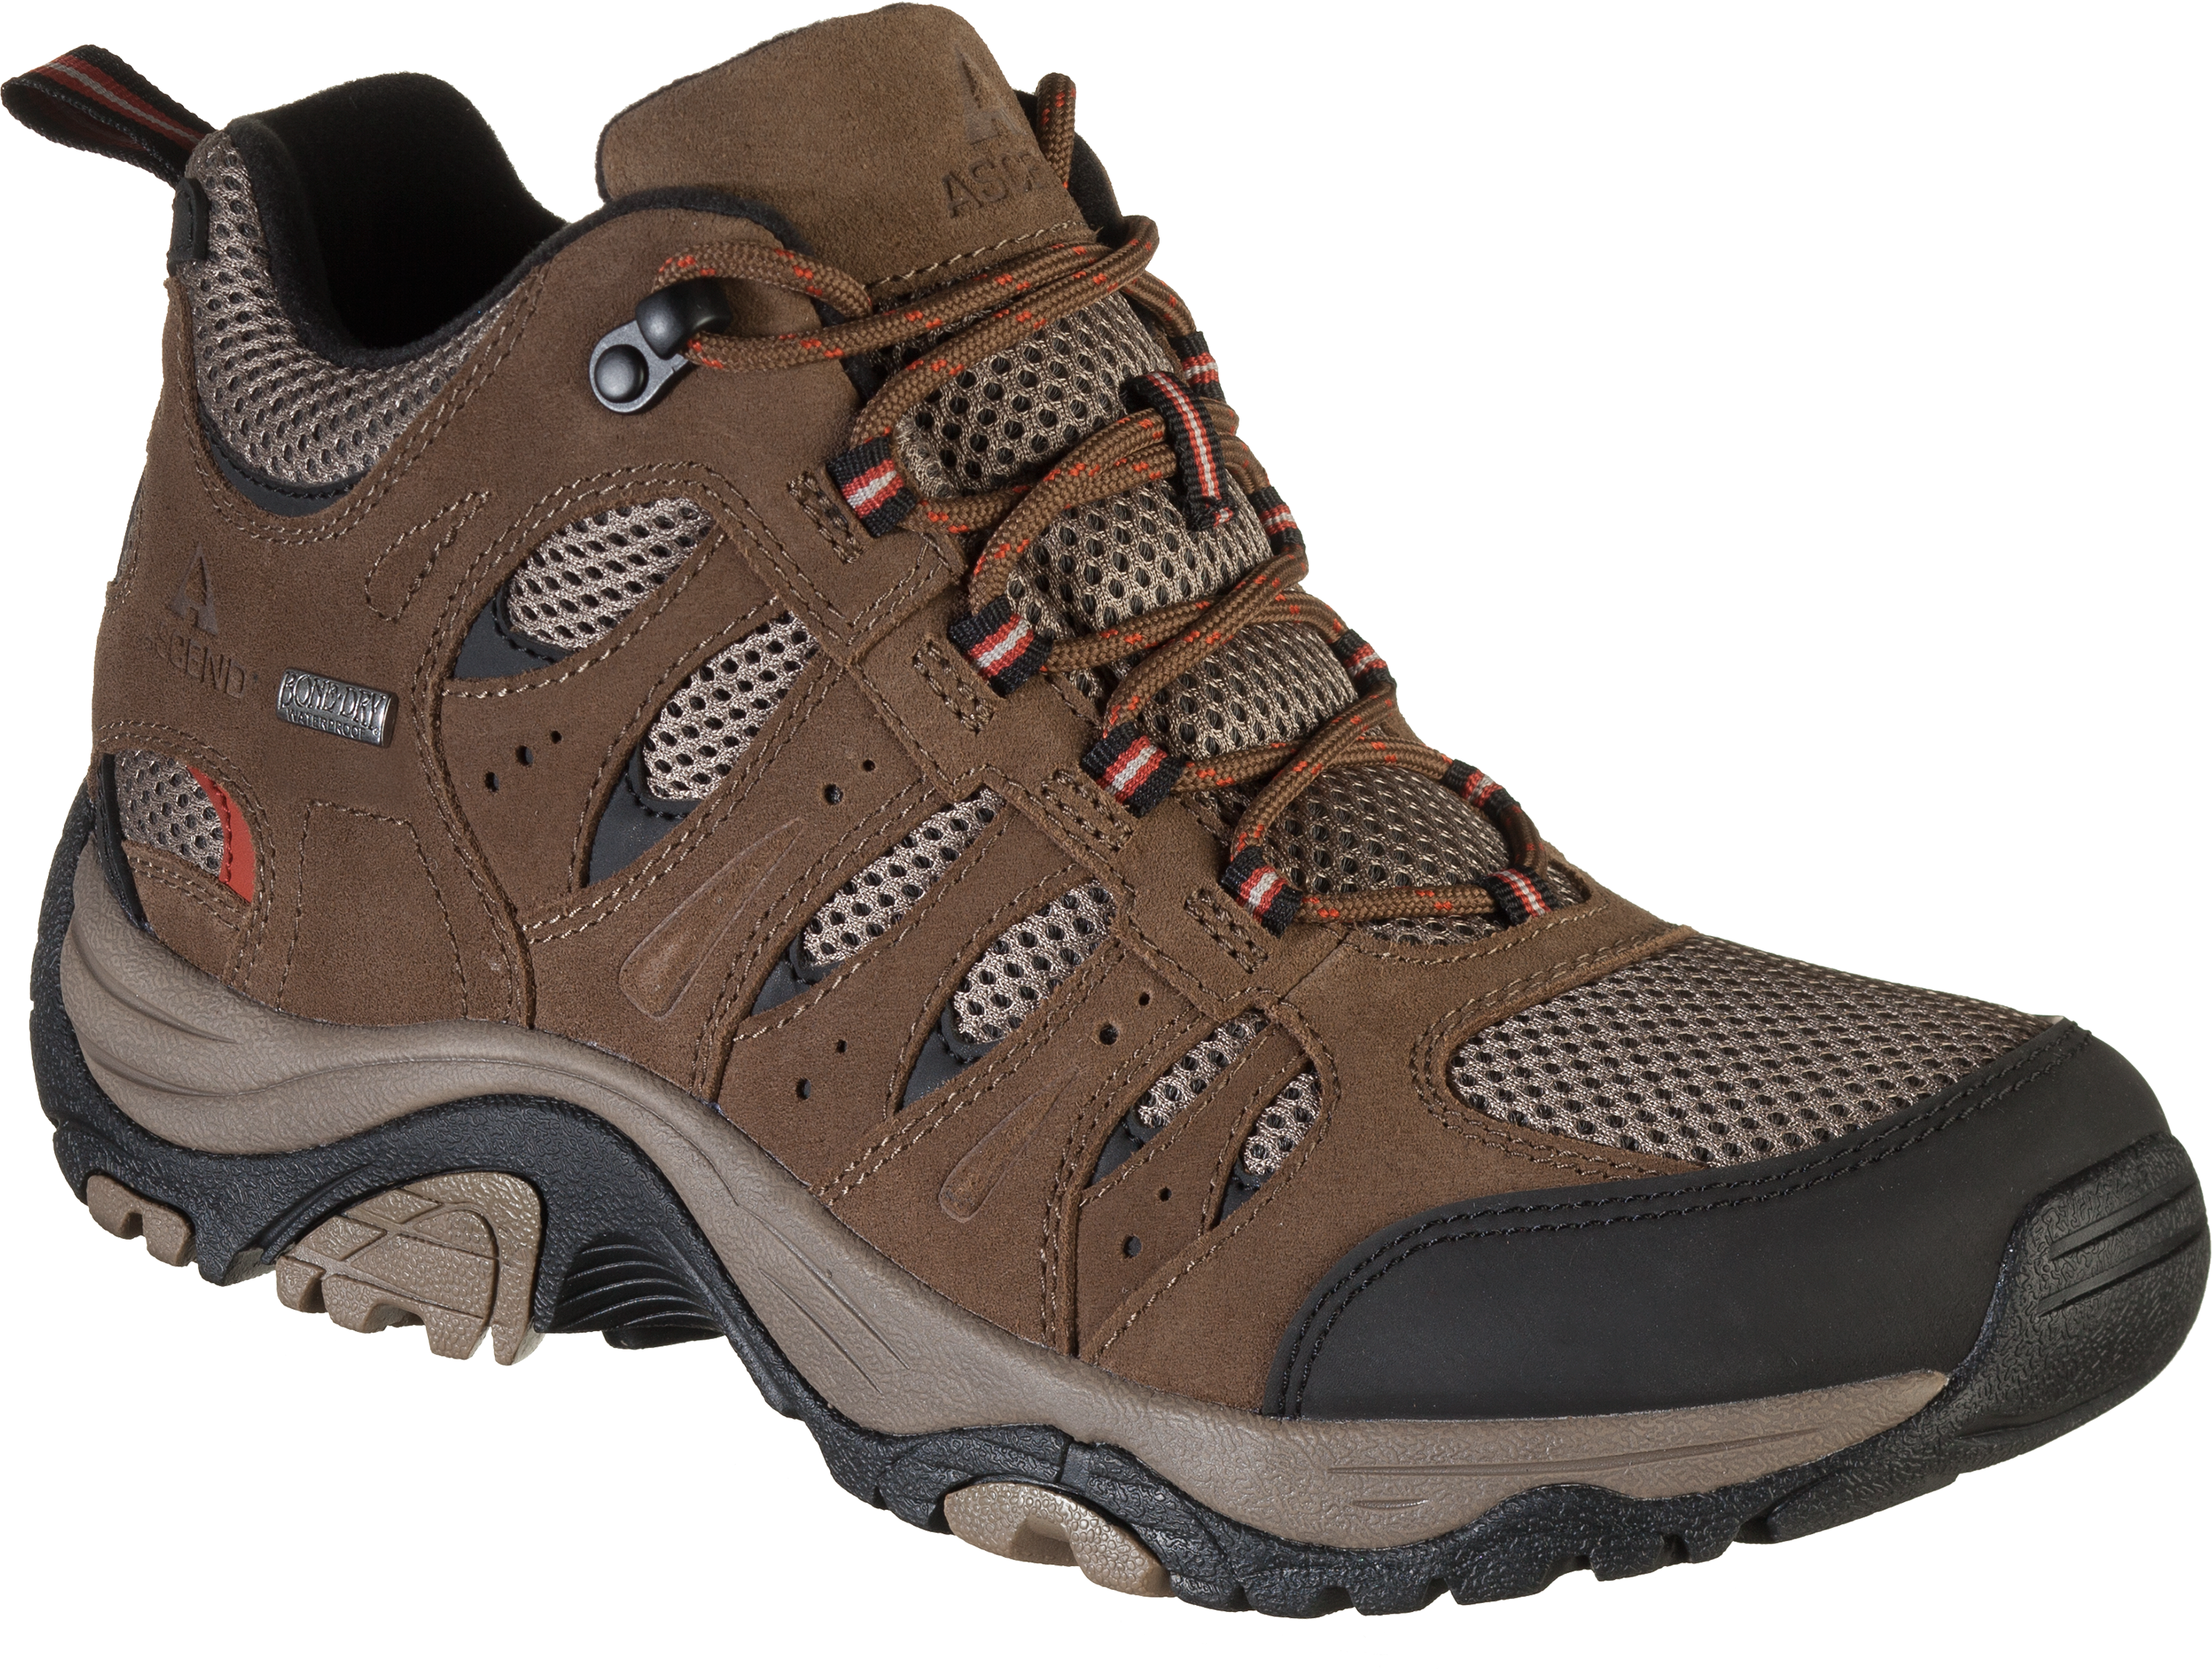 Ascend Lisco Mid Waterproof Hiking Boots for Men - Chocolate - 14M